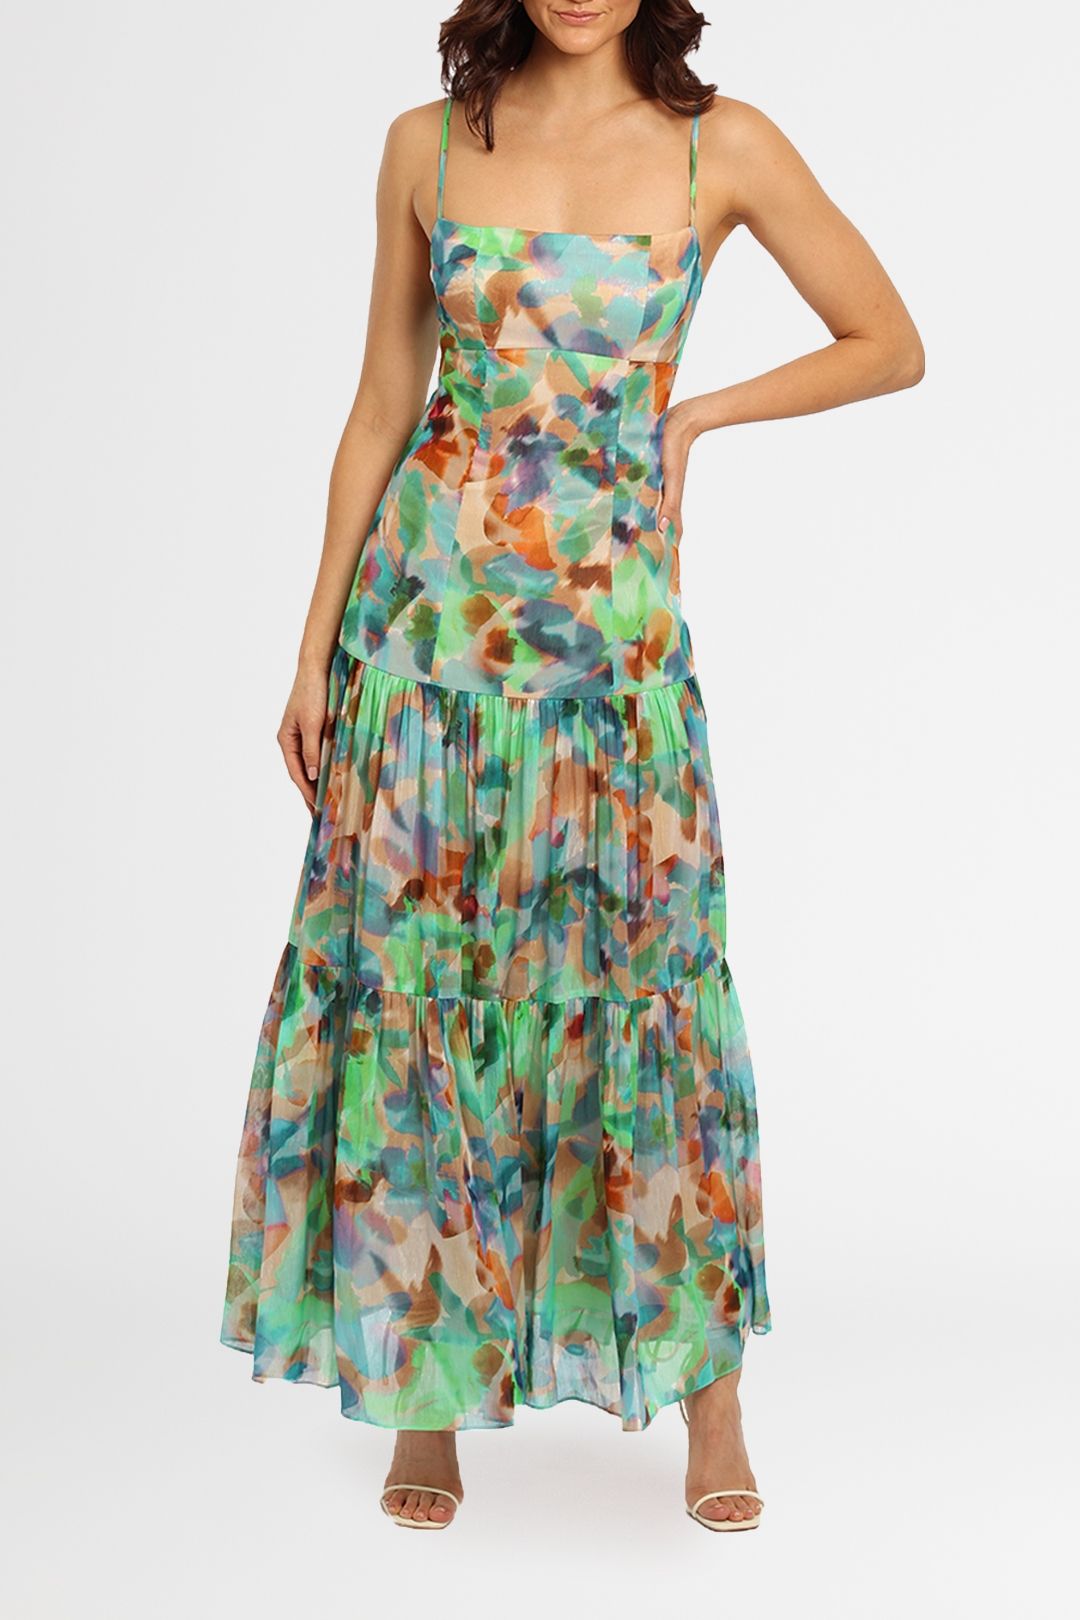 Ginger and Smart Beautiful Truth Sundress floral